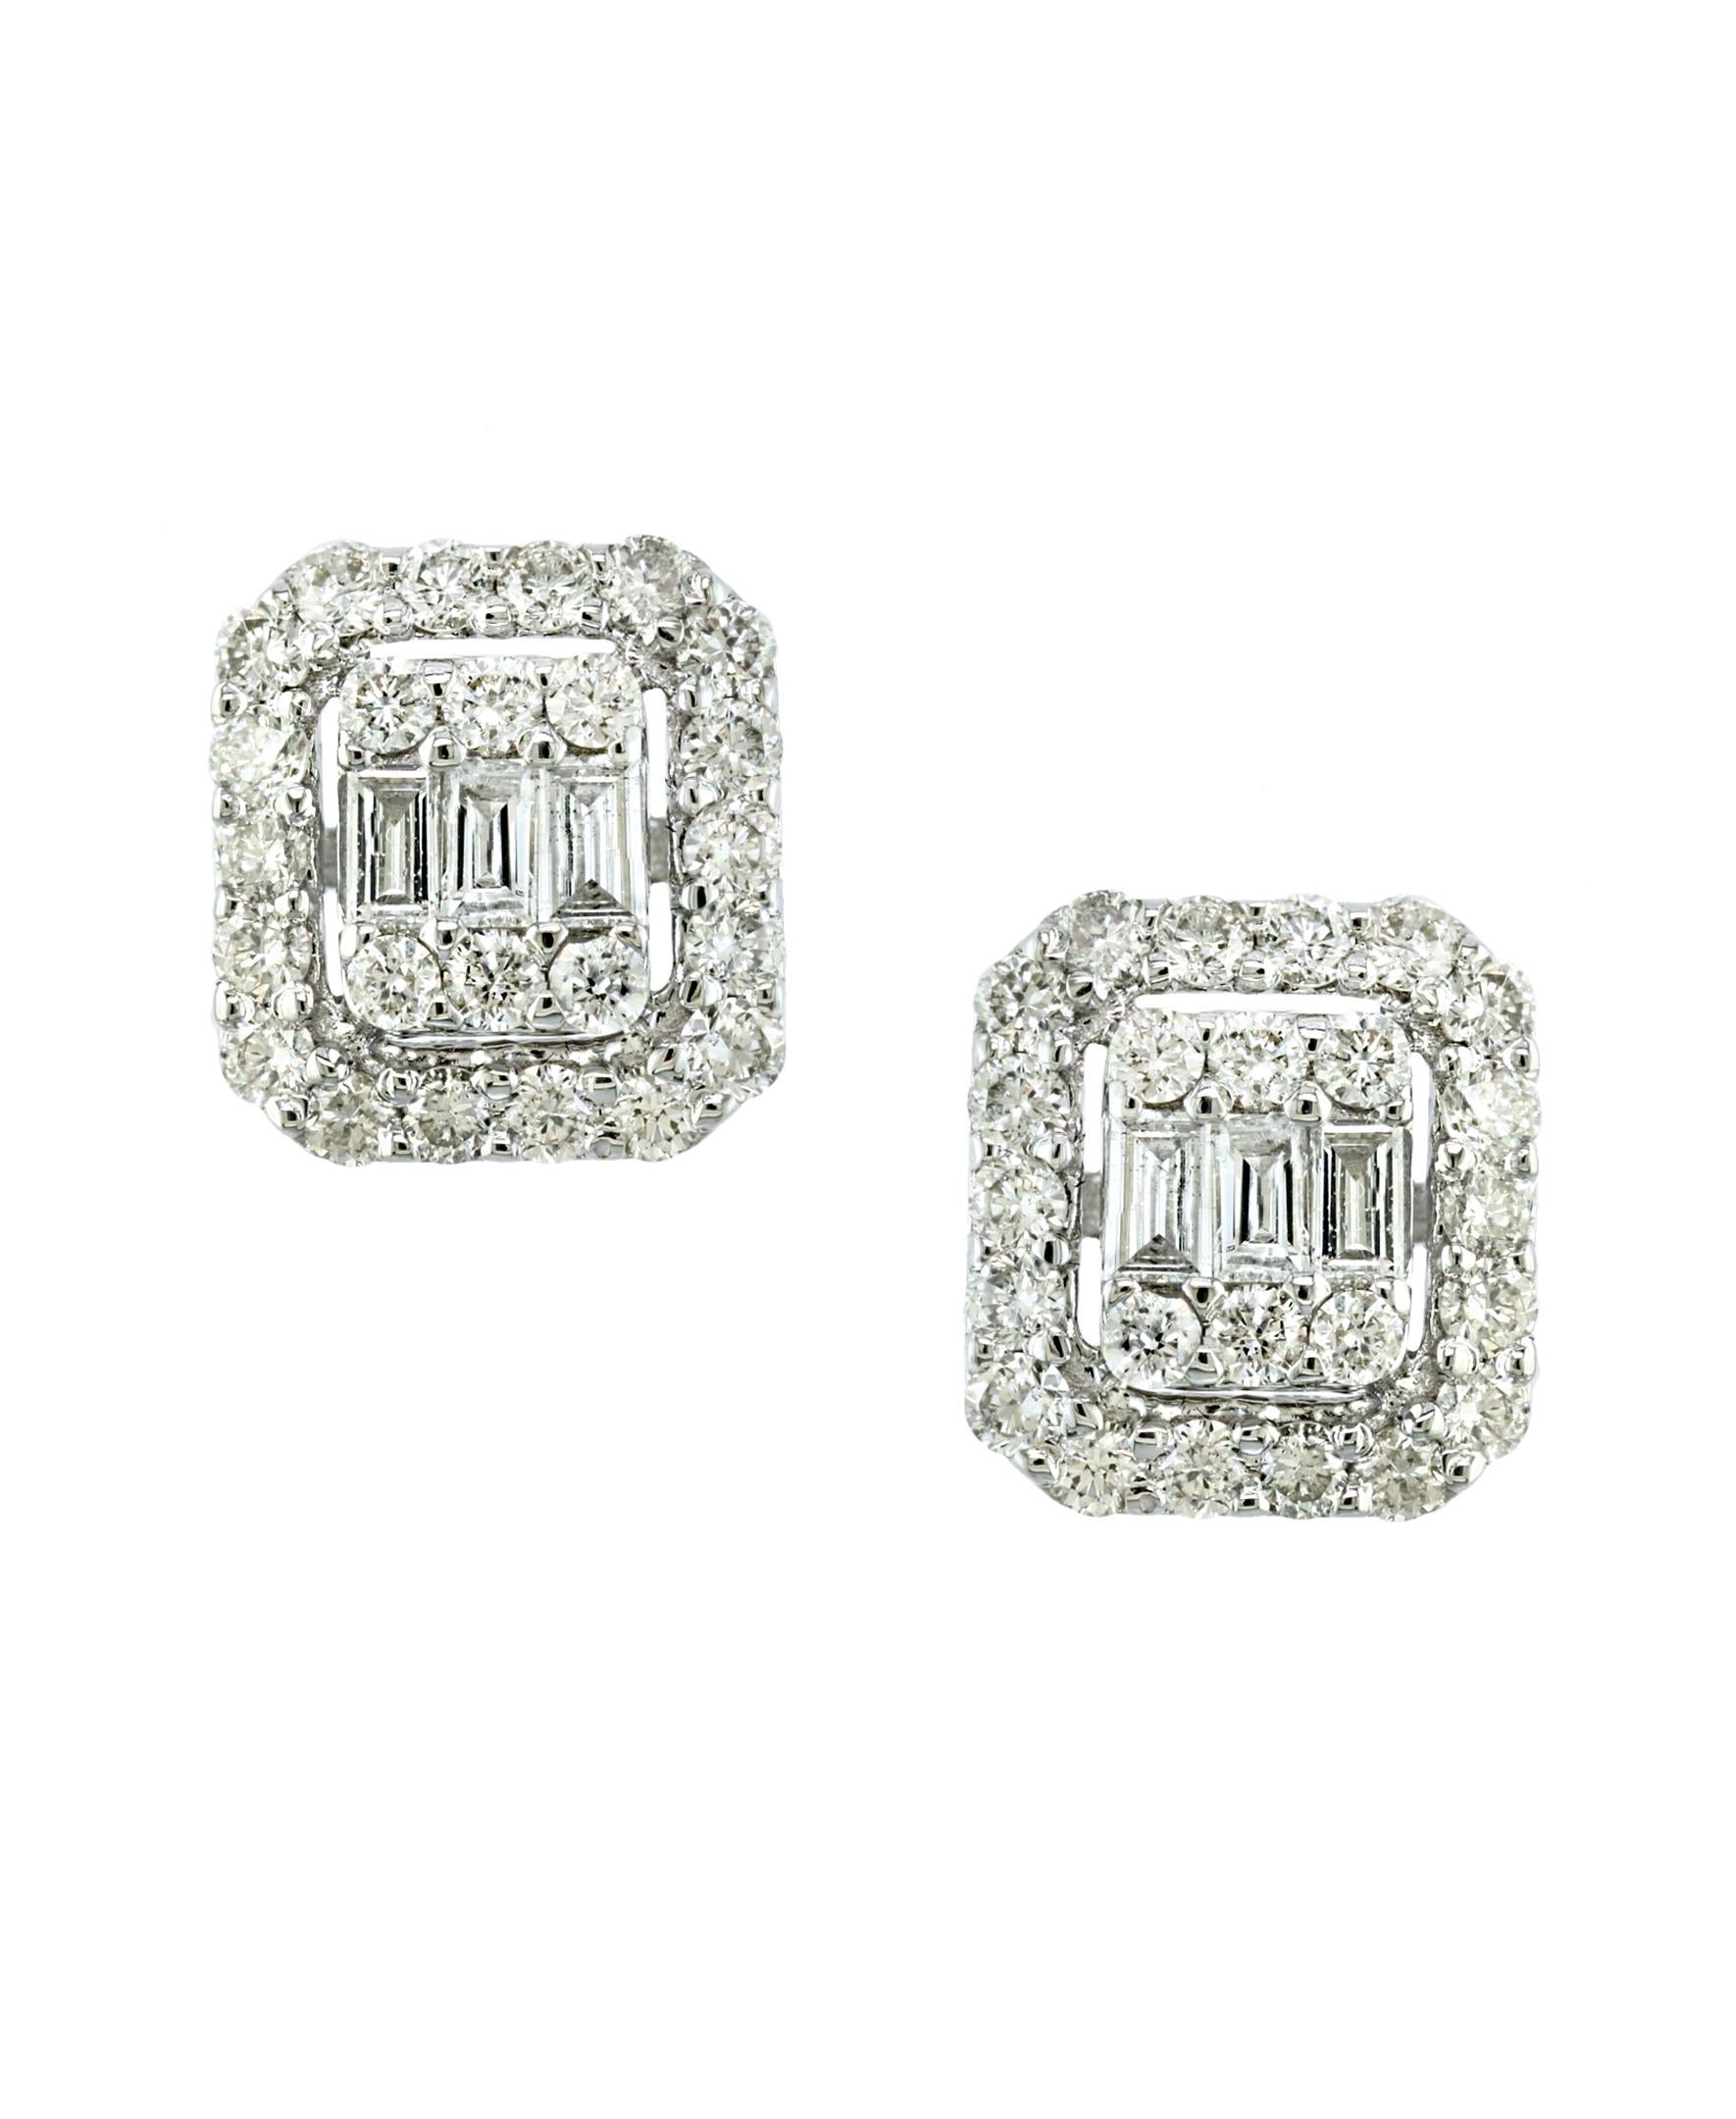 A sweet, shimmery style for any day of the week. These stud earrings clusters of  1.0 ct. t.w. round brilliant-cut diamonds with  Baguettse  Set in 18 kt White gold. Post, diamond floral cluster stud earrings.
It's  a unique and playful option.